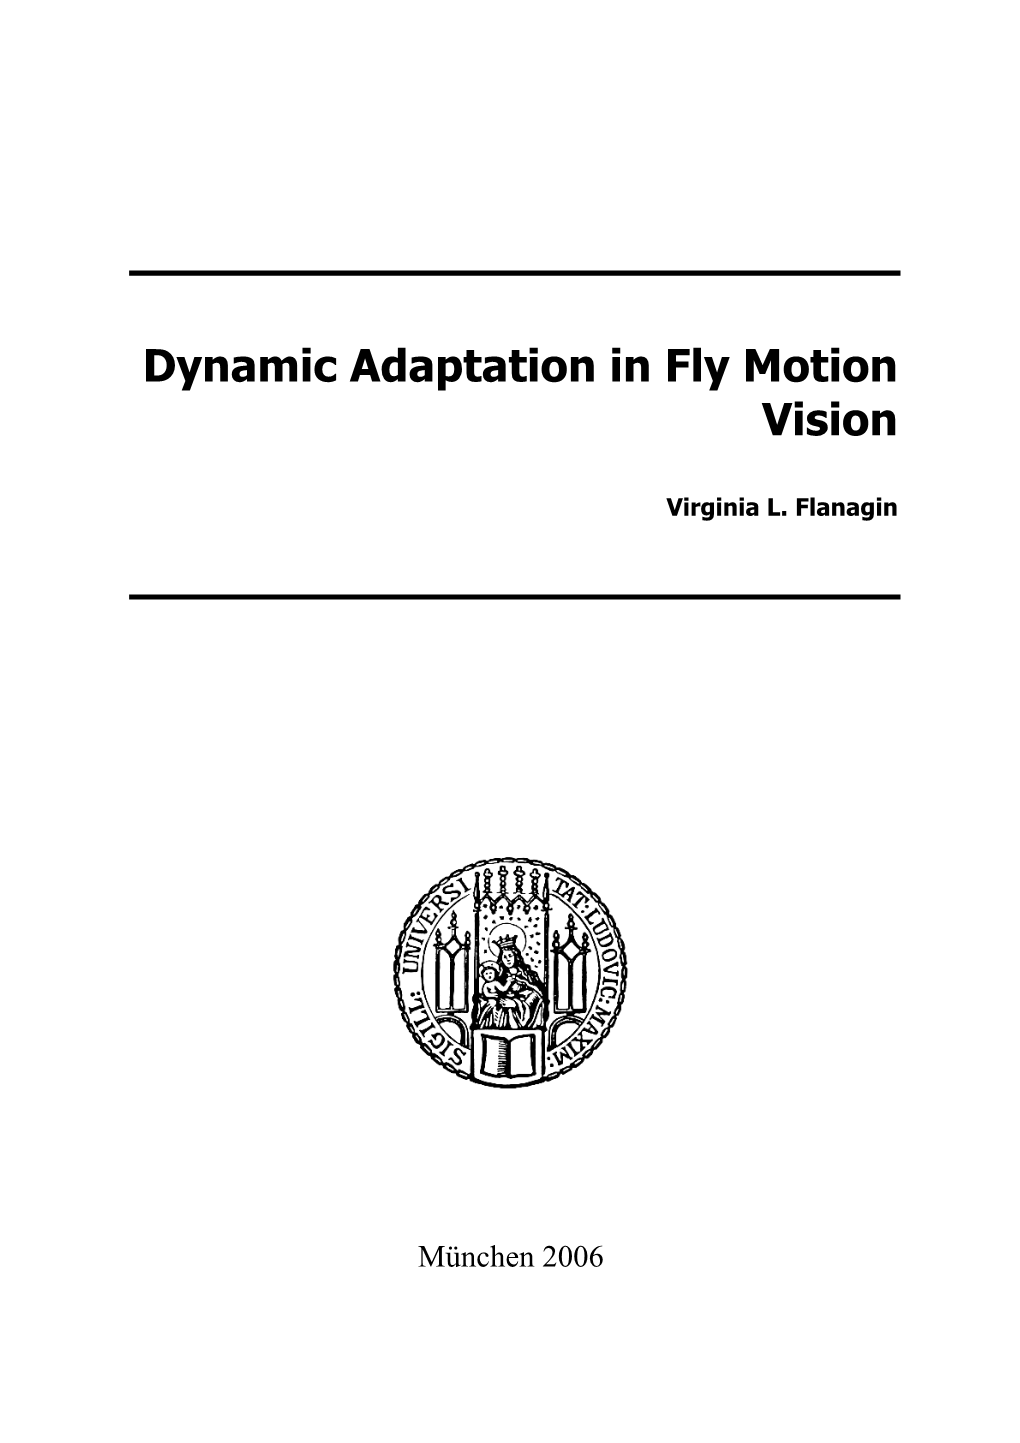 Dynamic Adaptation in Fly Motion Vision